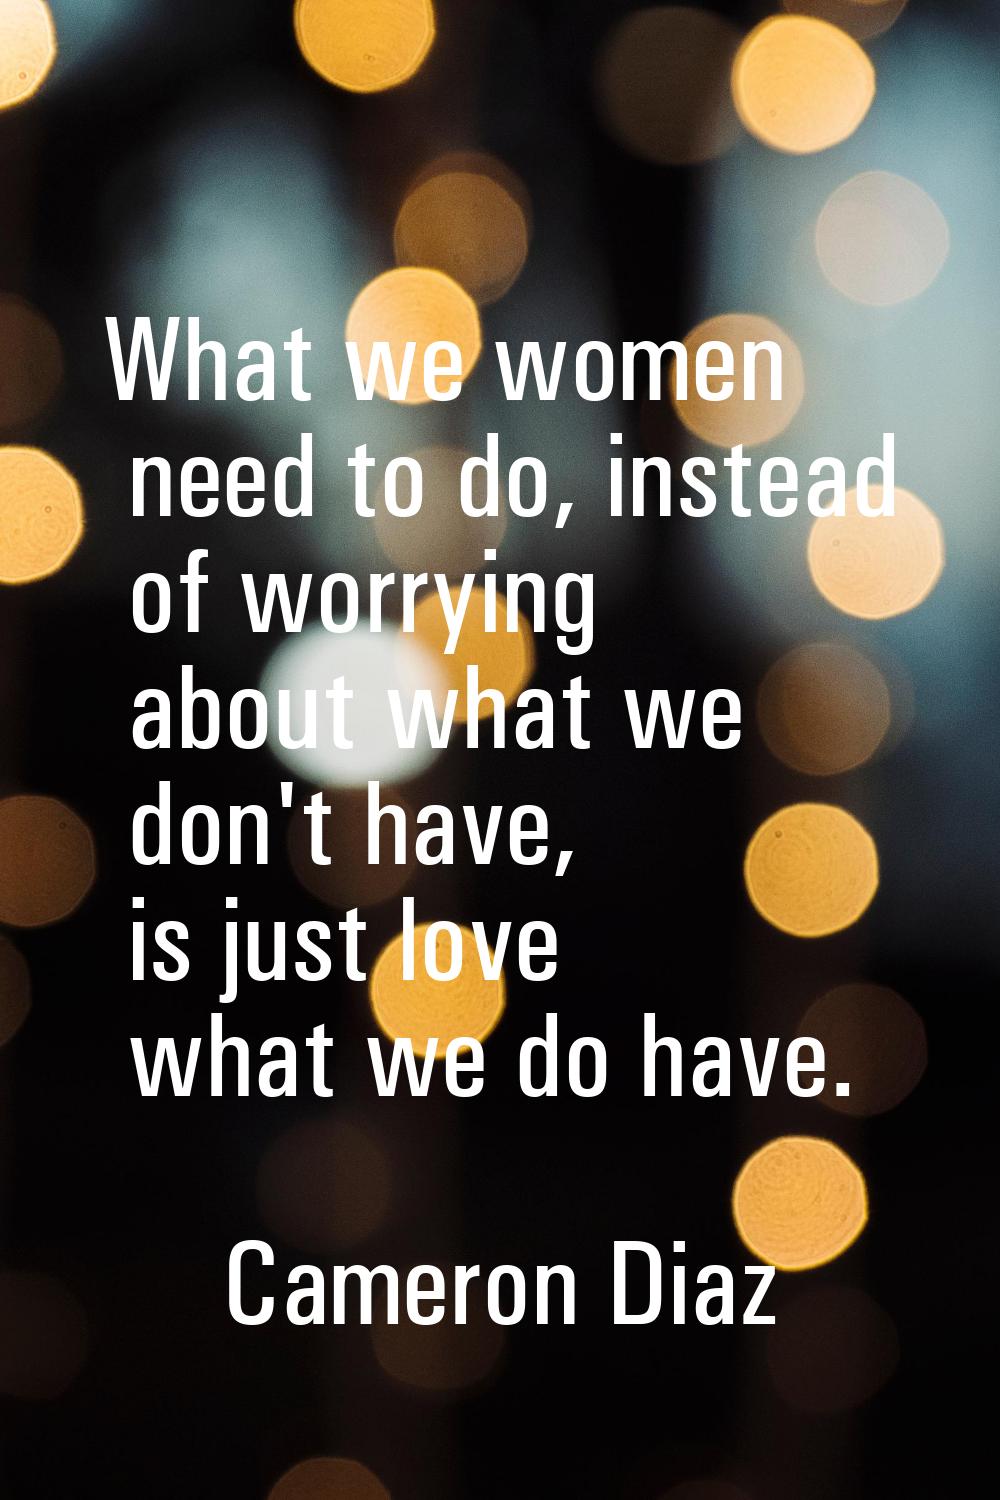 What we women need to do, instead of worrying about what we don't have, is just love what we do hav